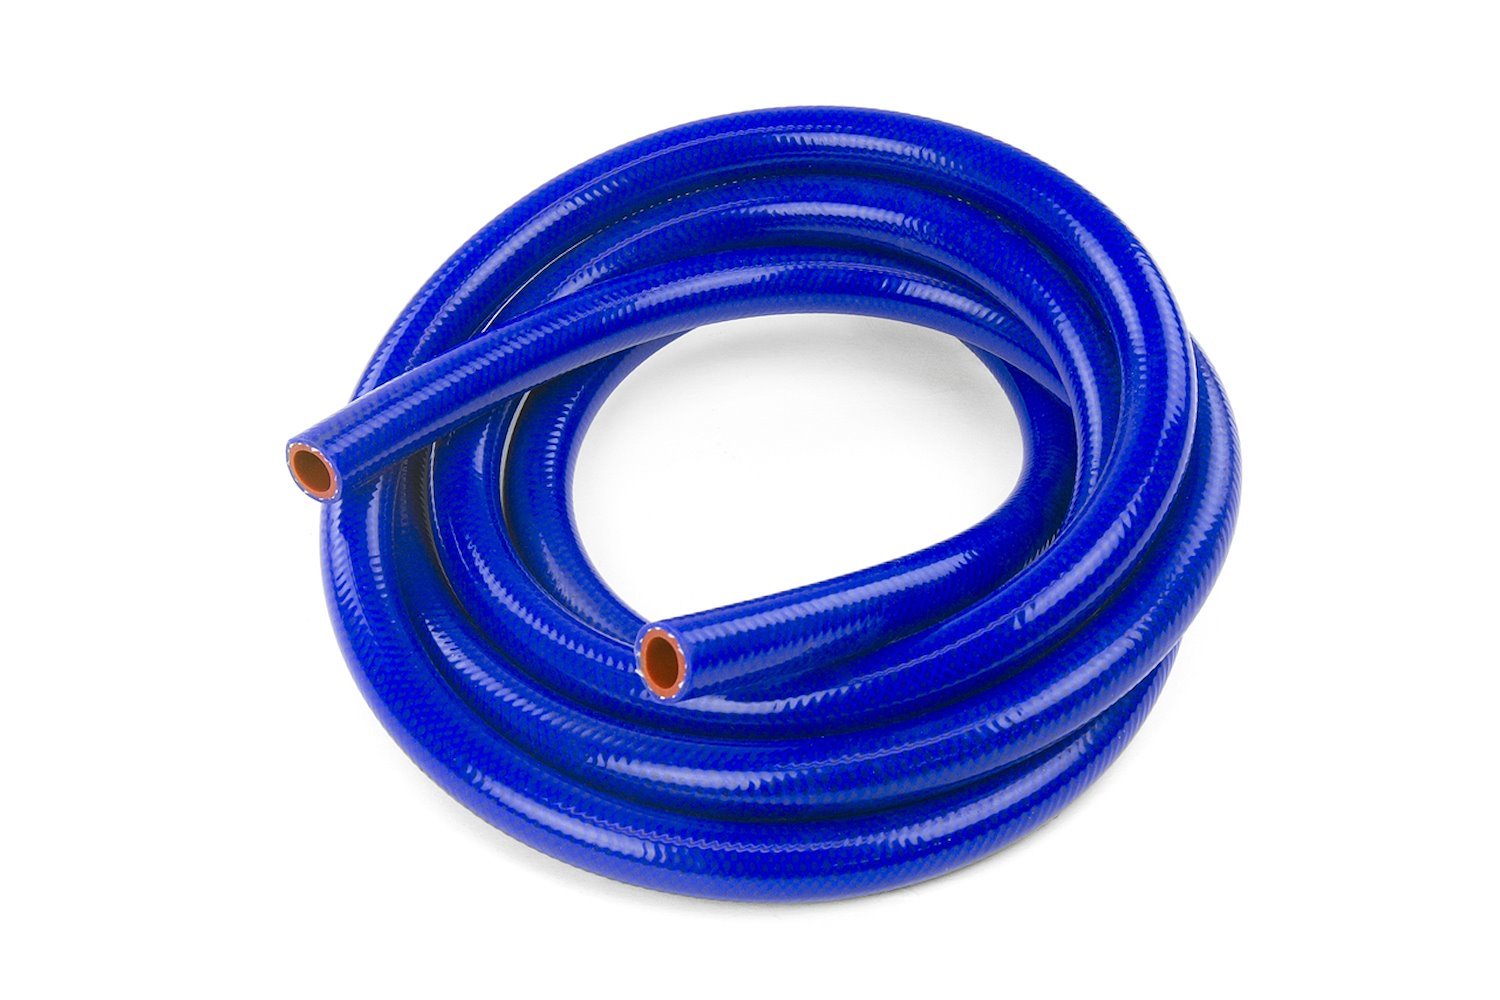 HTHH-038-BLUEx10 Silicone Heater Hose Tubing, High-Temp 1-Ply Reinforced, 3/8 in. ID, 10 ft. Roll, Blue